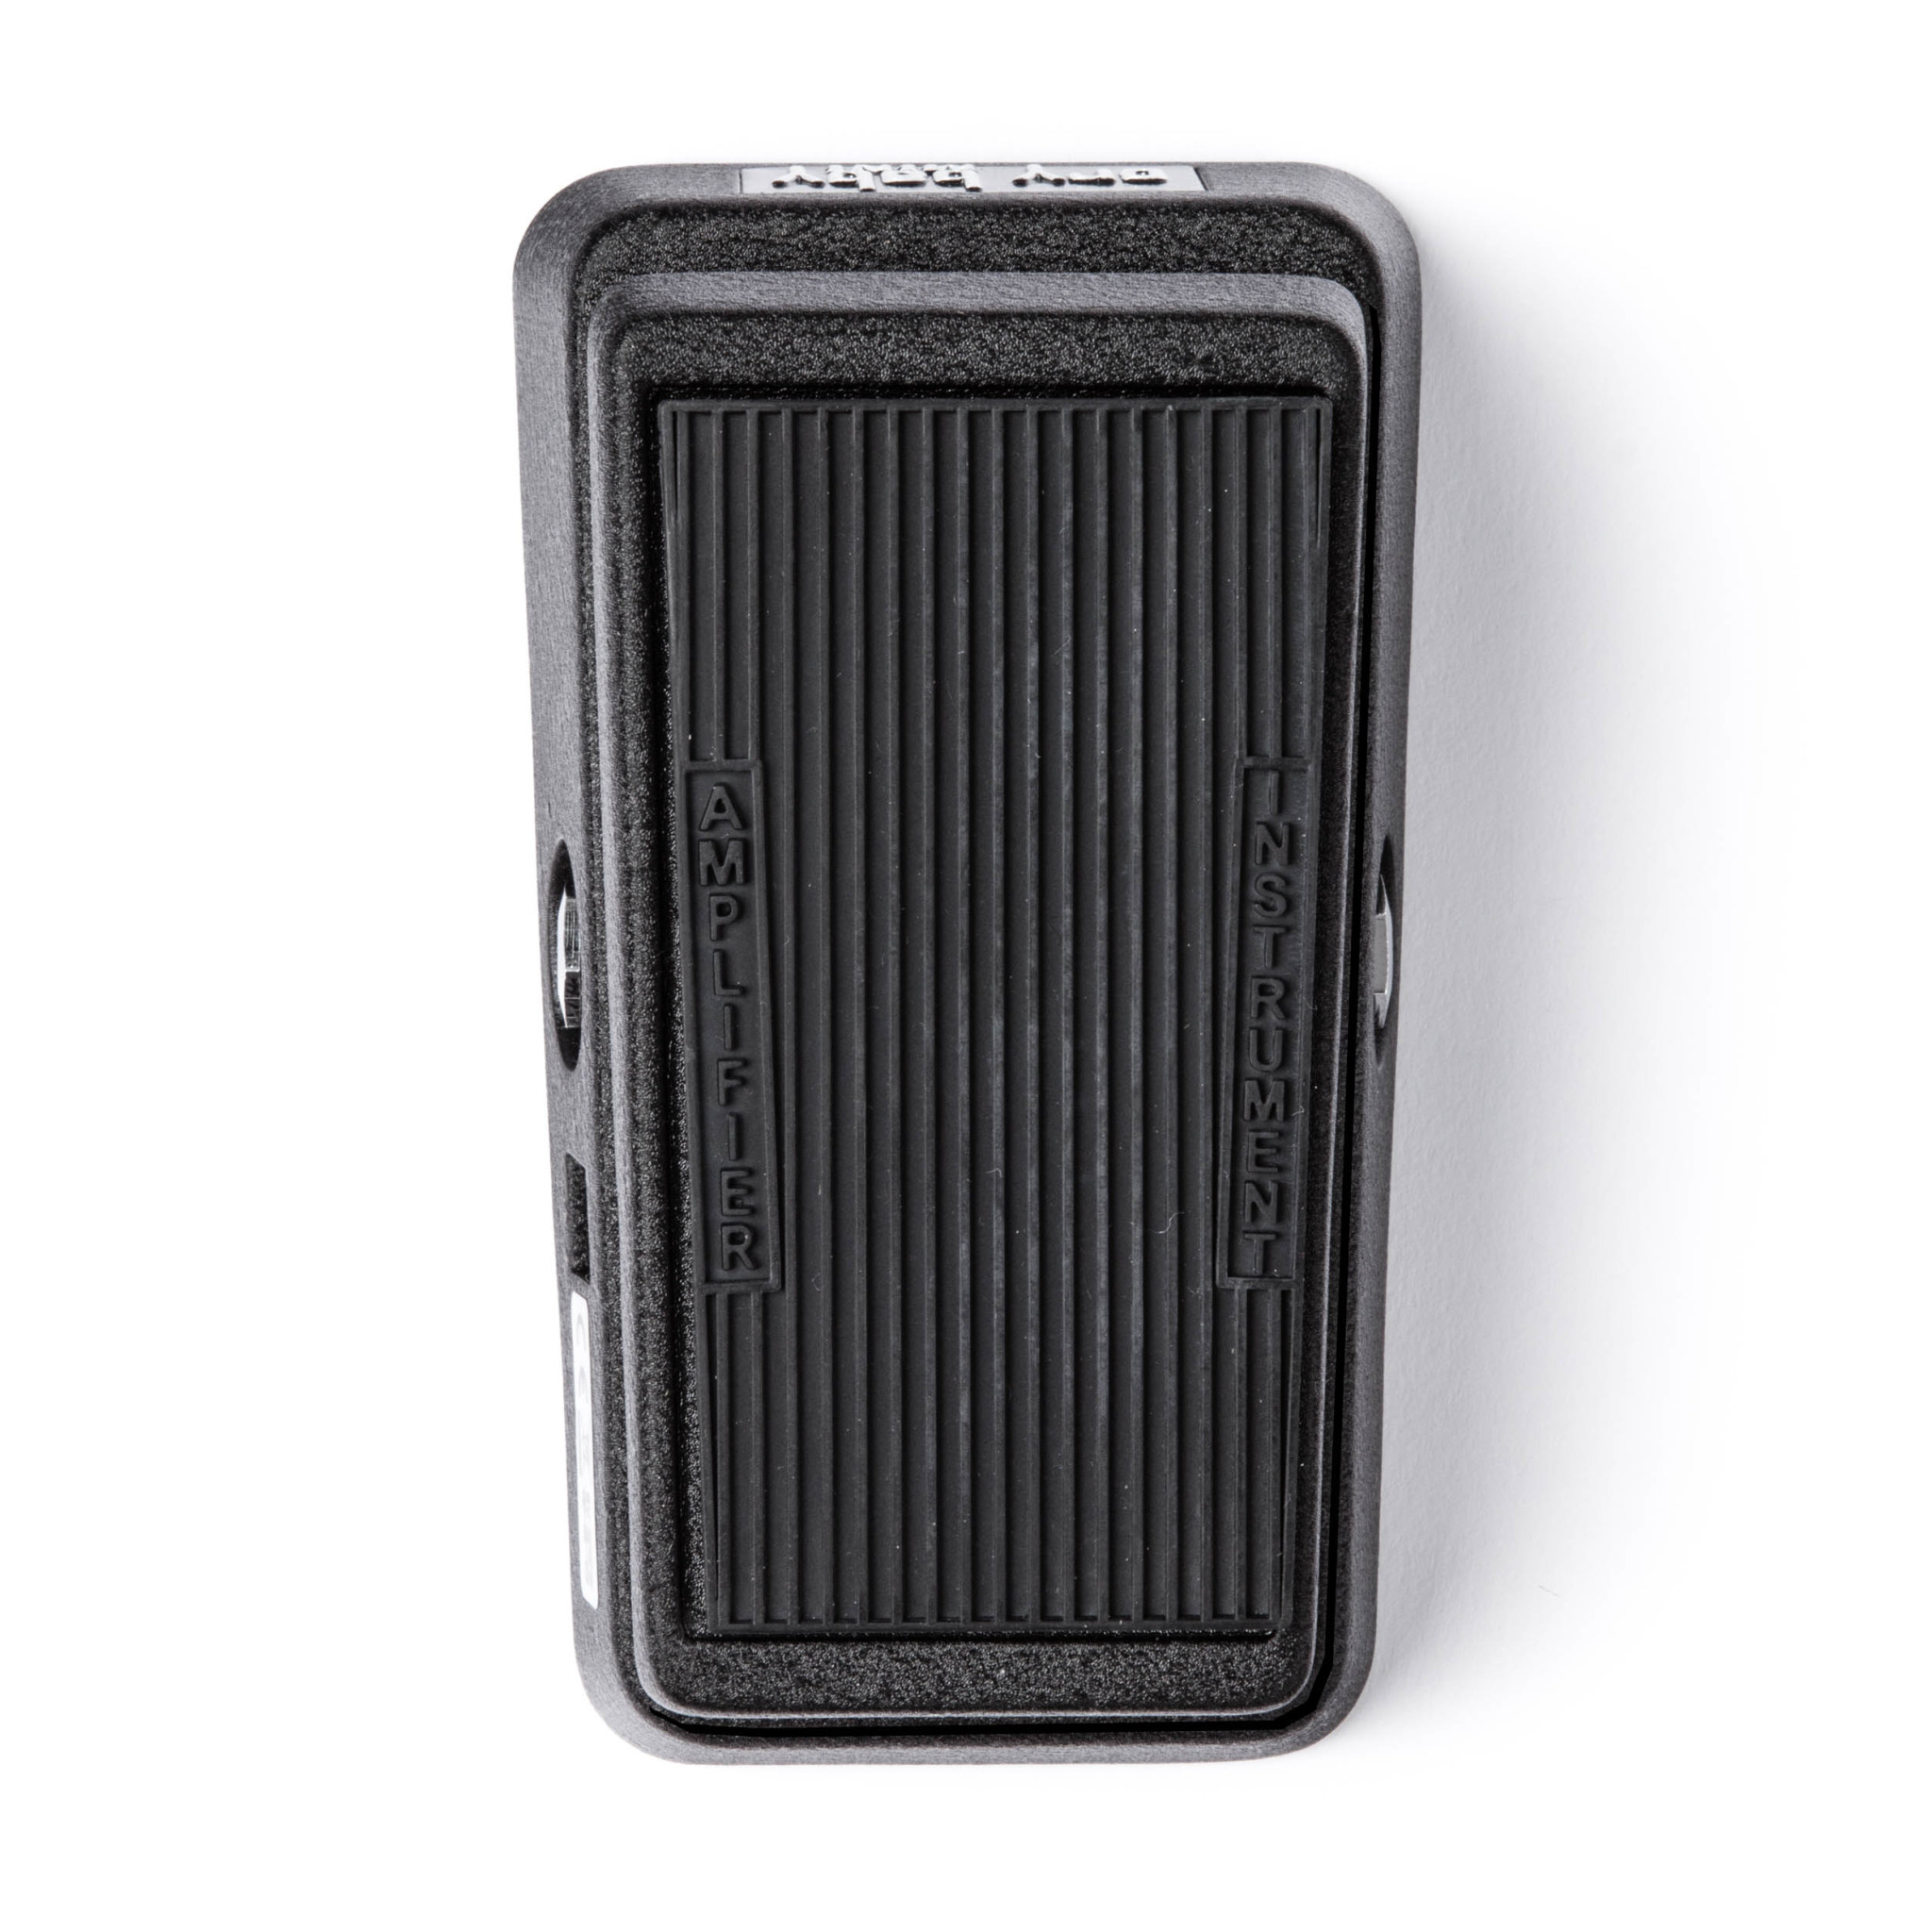 Dunlop Cry Baby Mini Wah Pedal